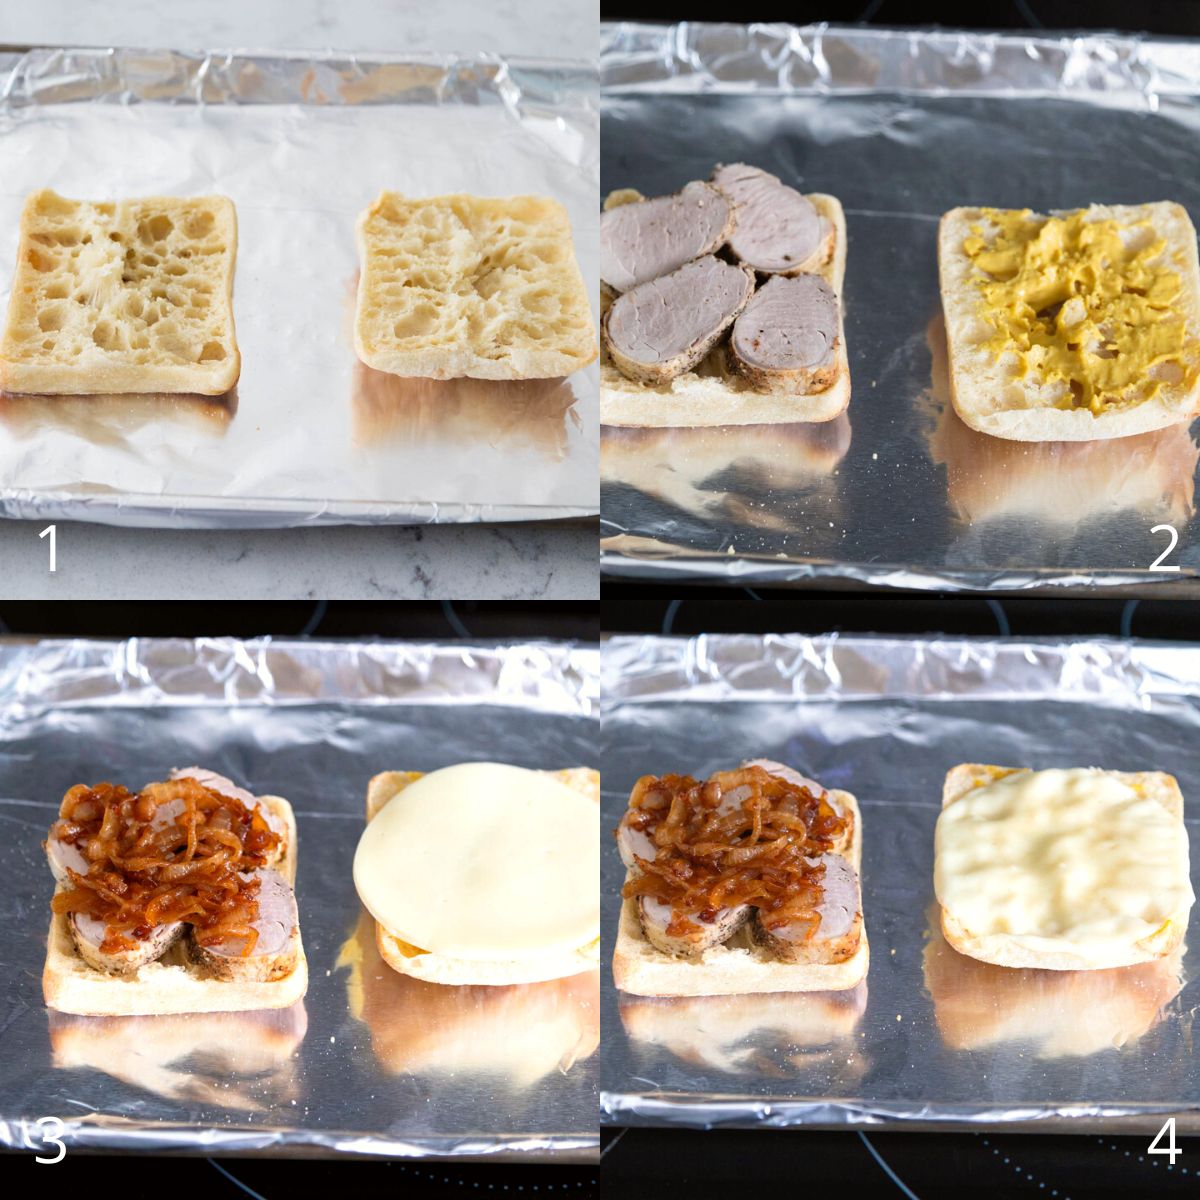 The step by step photos show how to build the pork sandwiches and bake them.